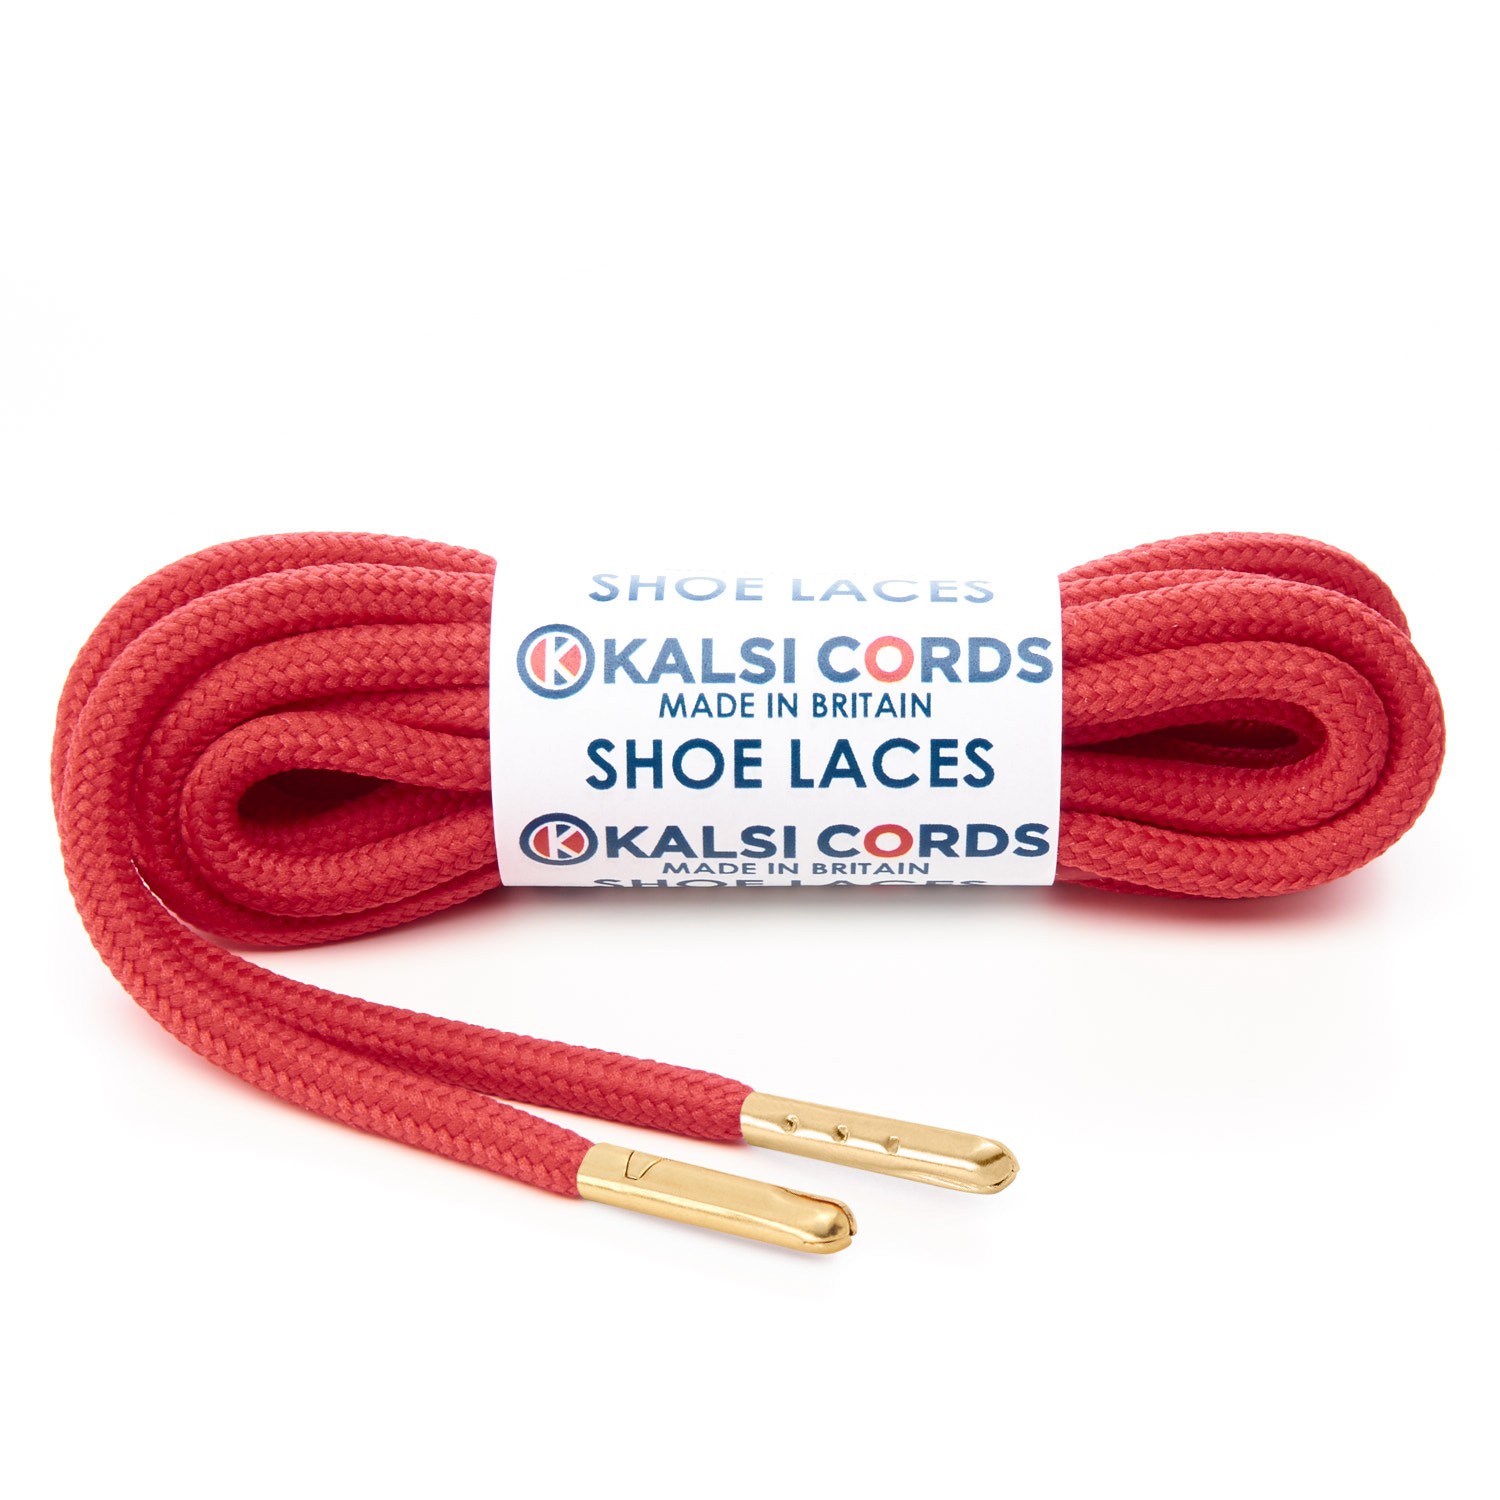 T621 5mm Round Polyester Shoe Laces Rose Madder Red 1 Gold Metal Tip Kalsi Cords